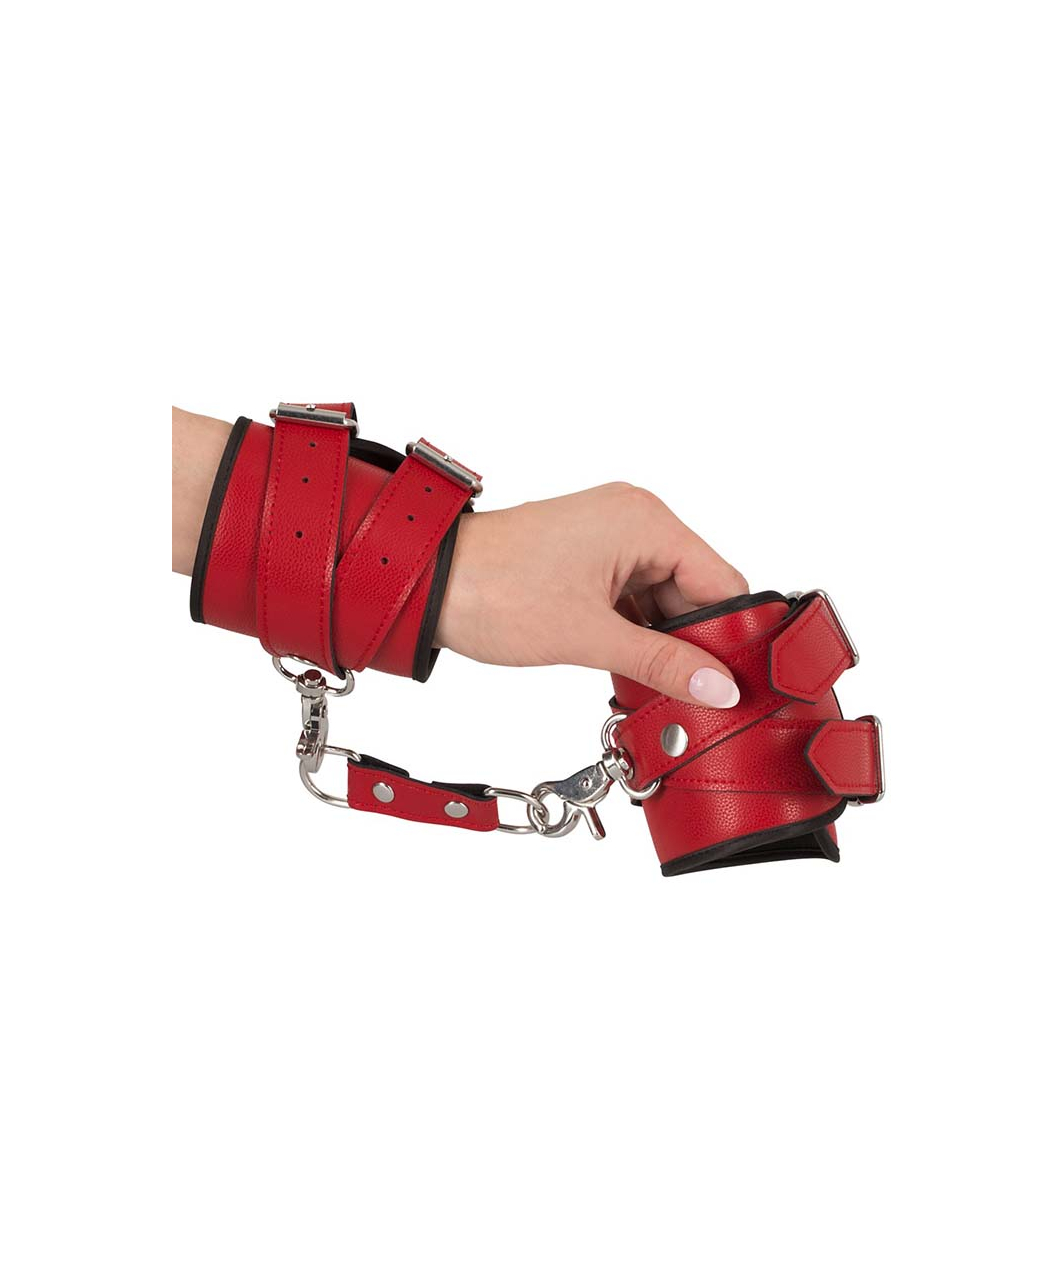 Bad Kitty Red Harness Set